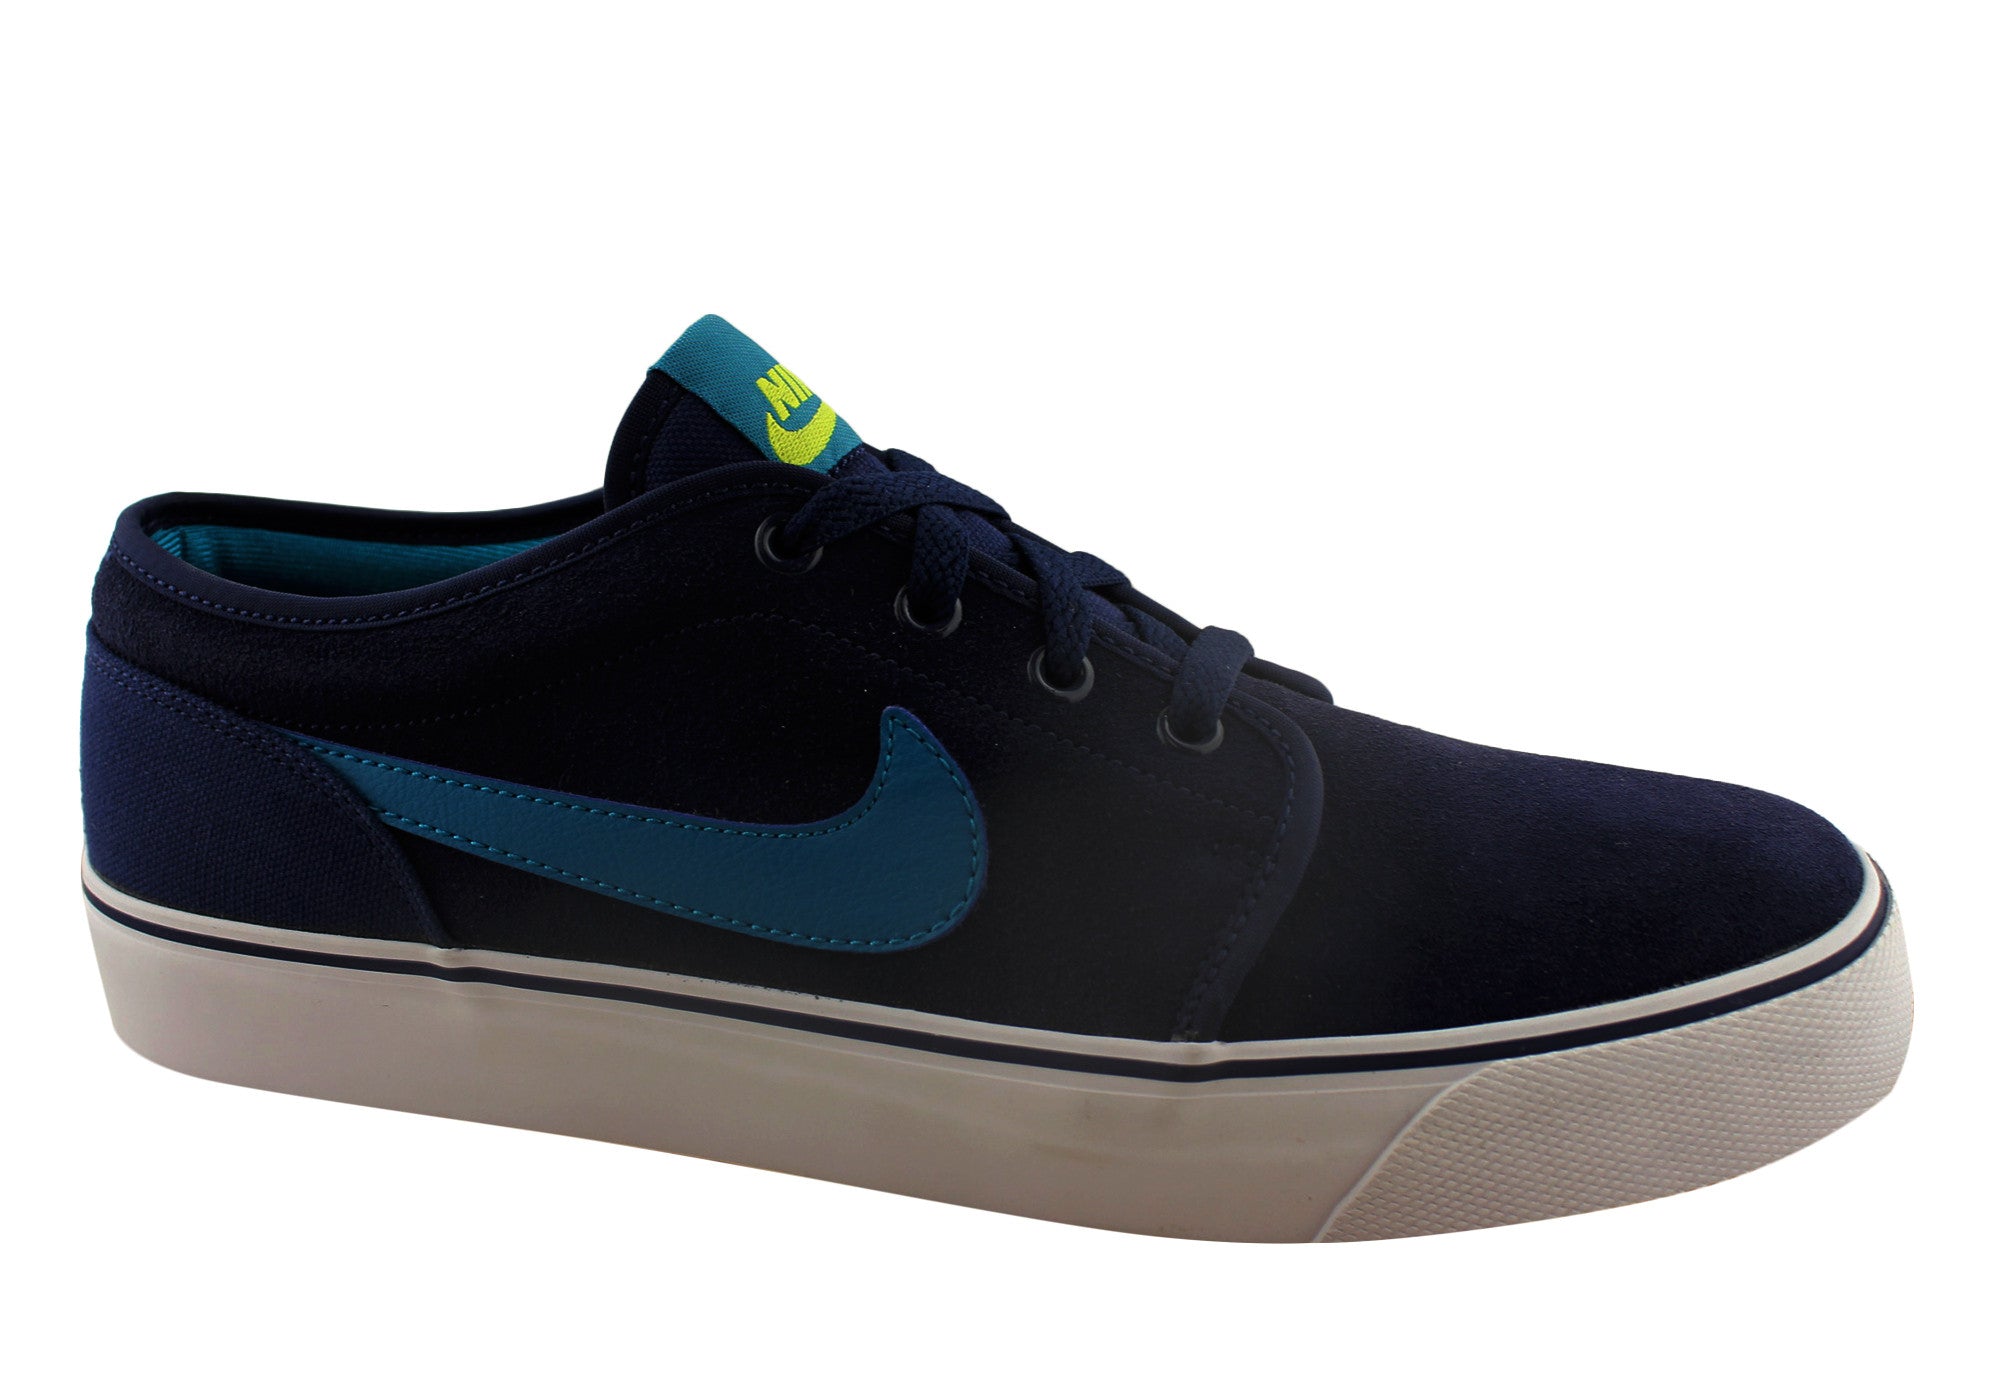 Nike Toki Leather Mens Lace Up Casual Shoes